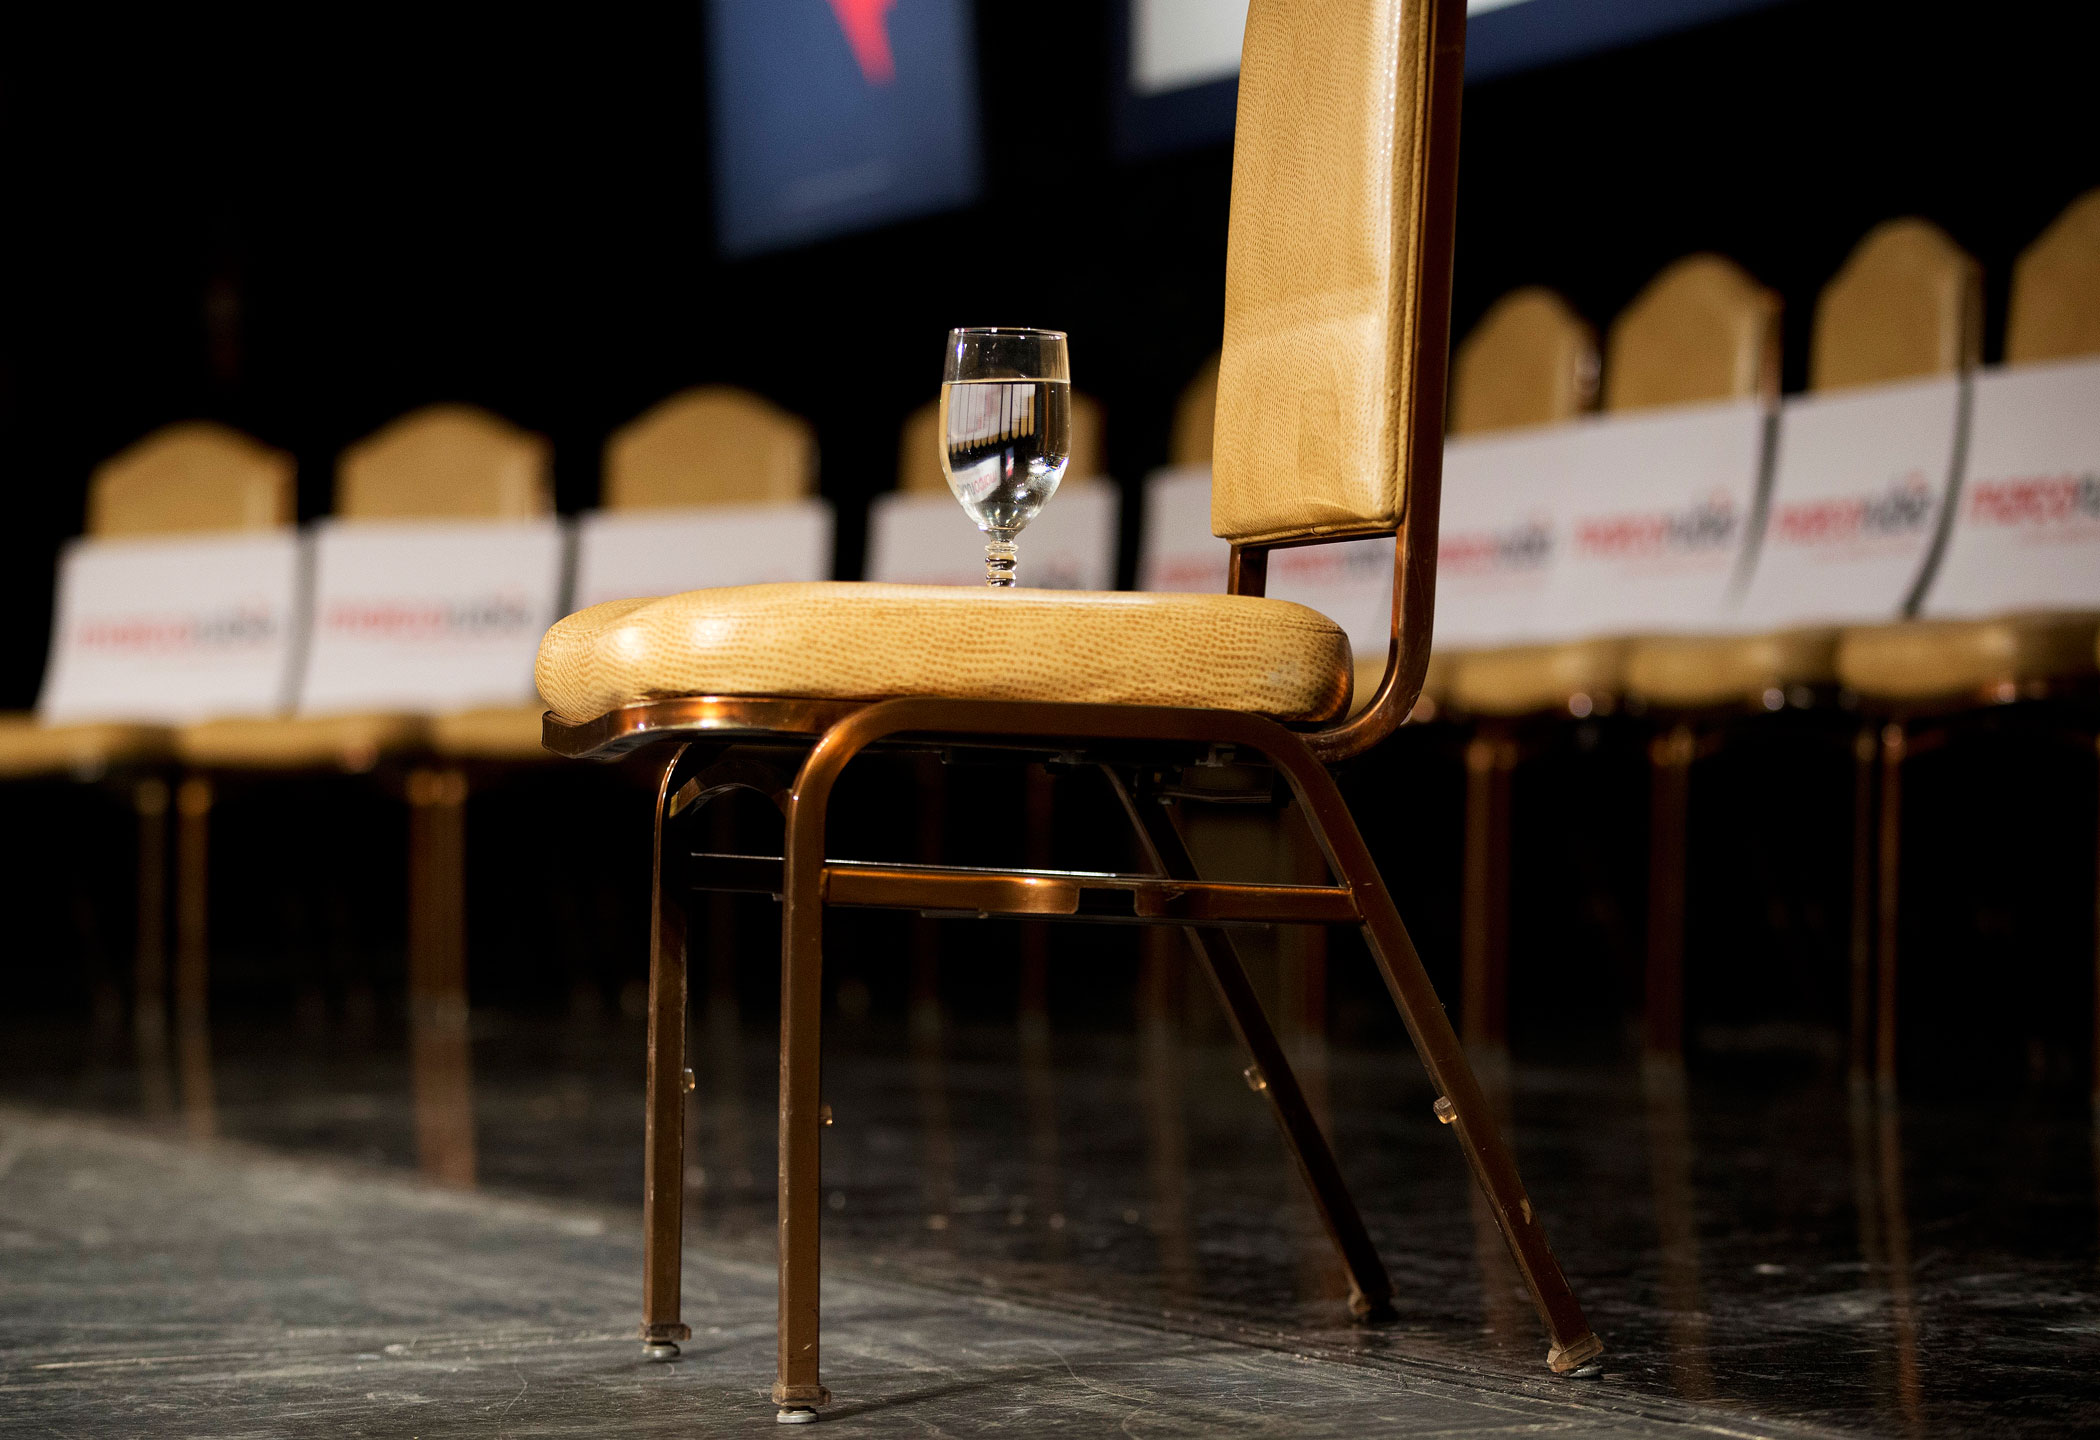 A glass of water for Florida Sen. Marco Rubio is placed on a chair at a rally on Feb. 21, 2016, in North Las Vegas.